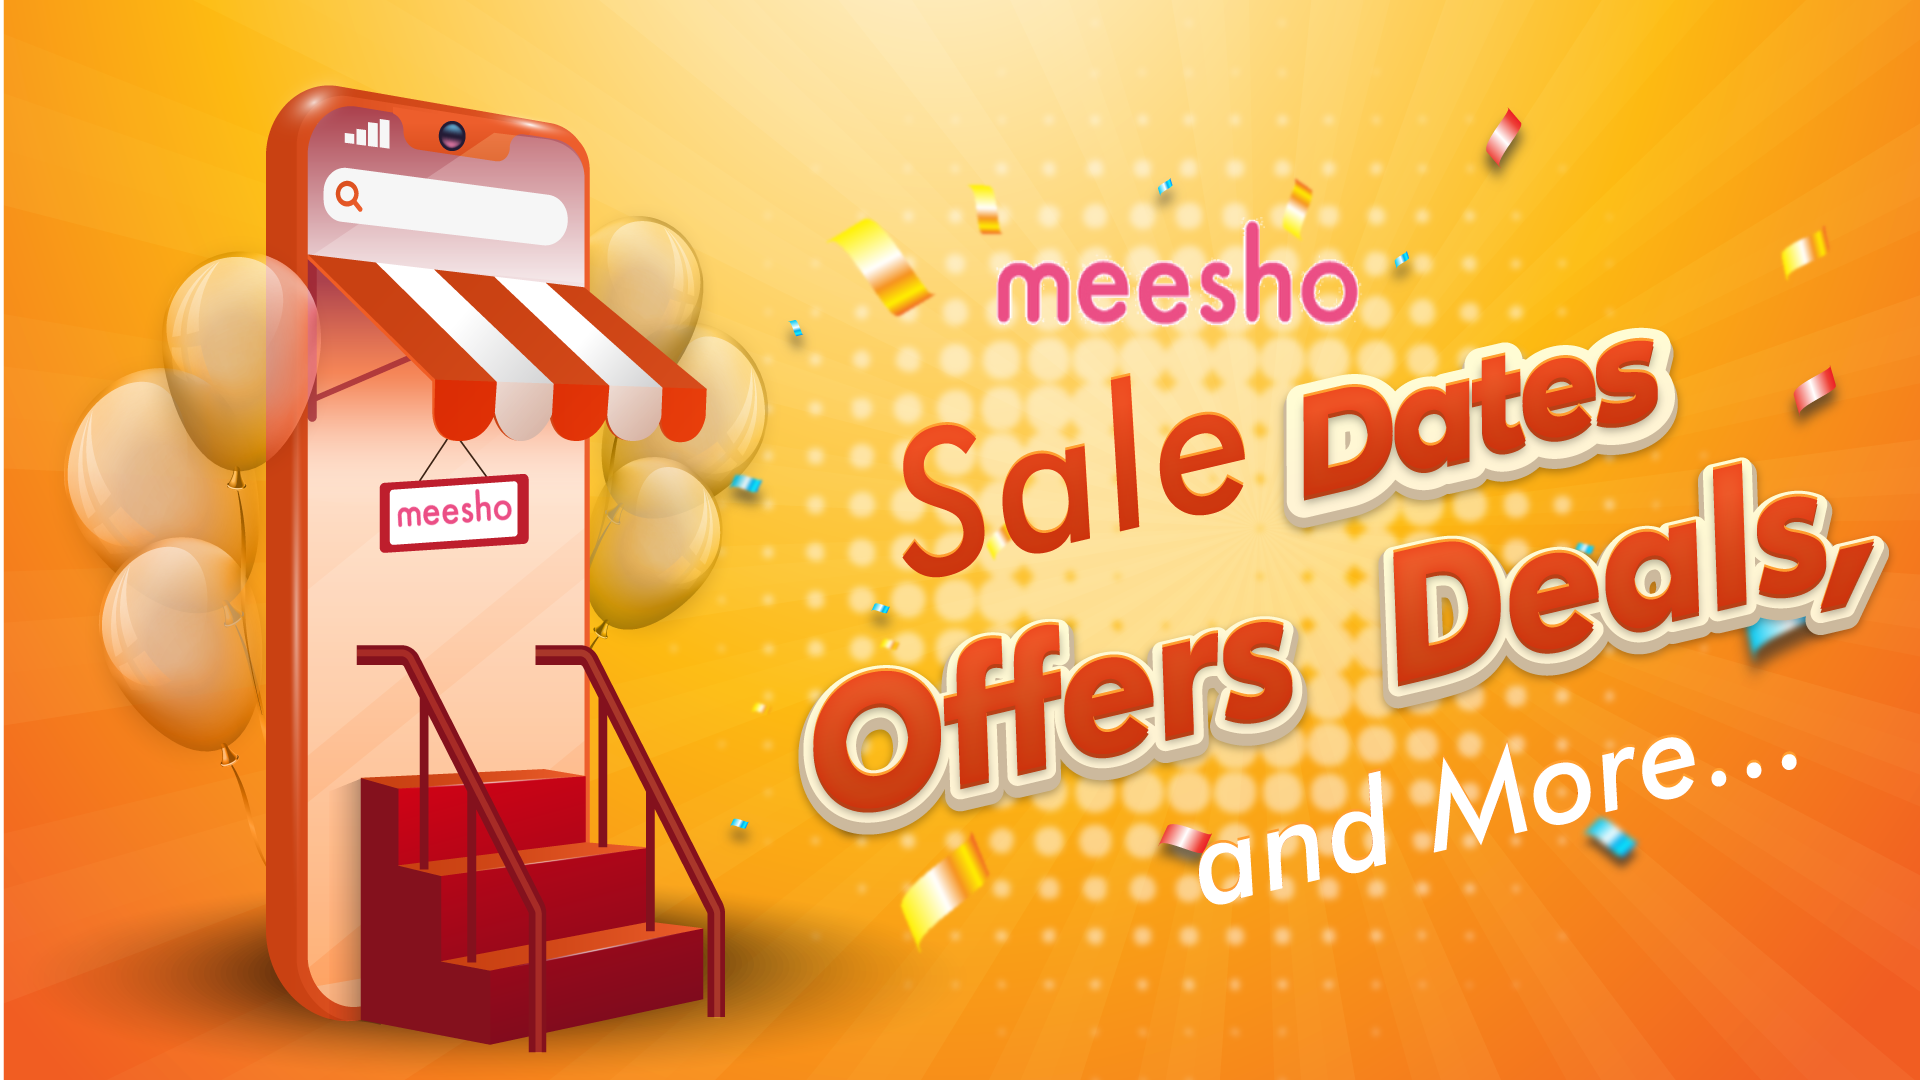 Meesho sale Dates, Offers deals and More